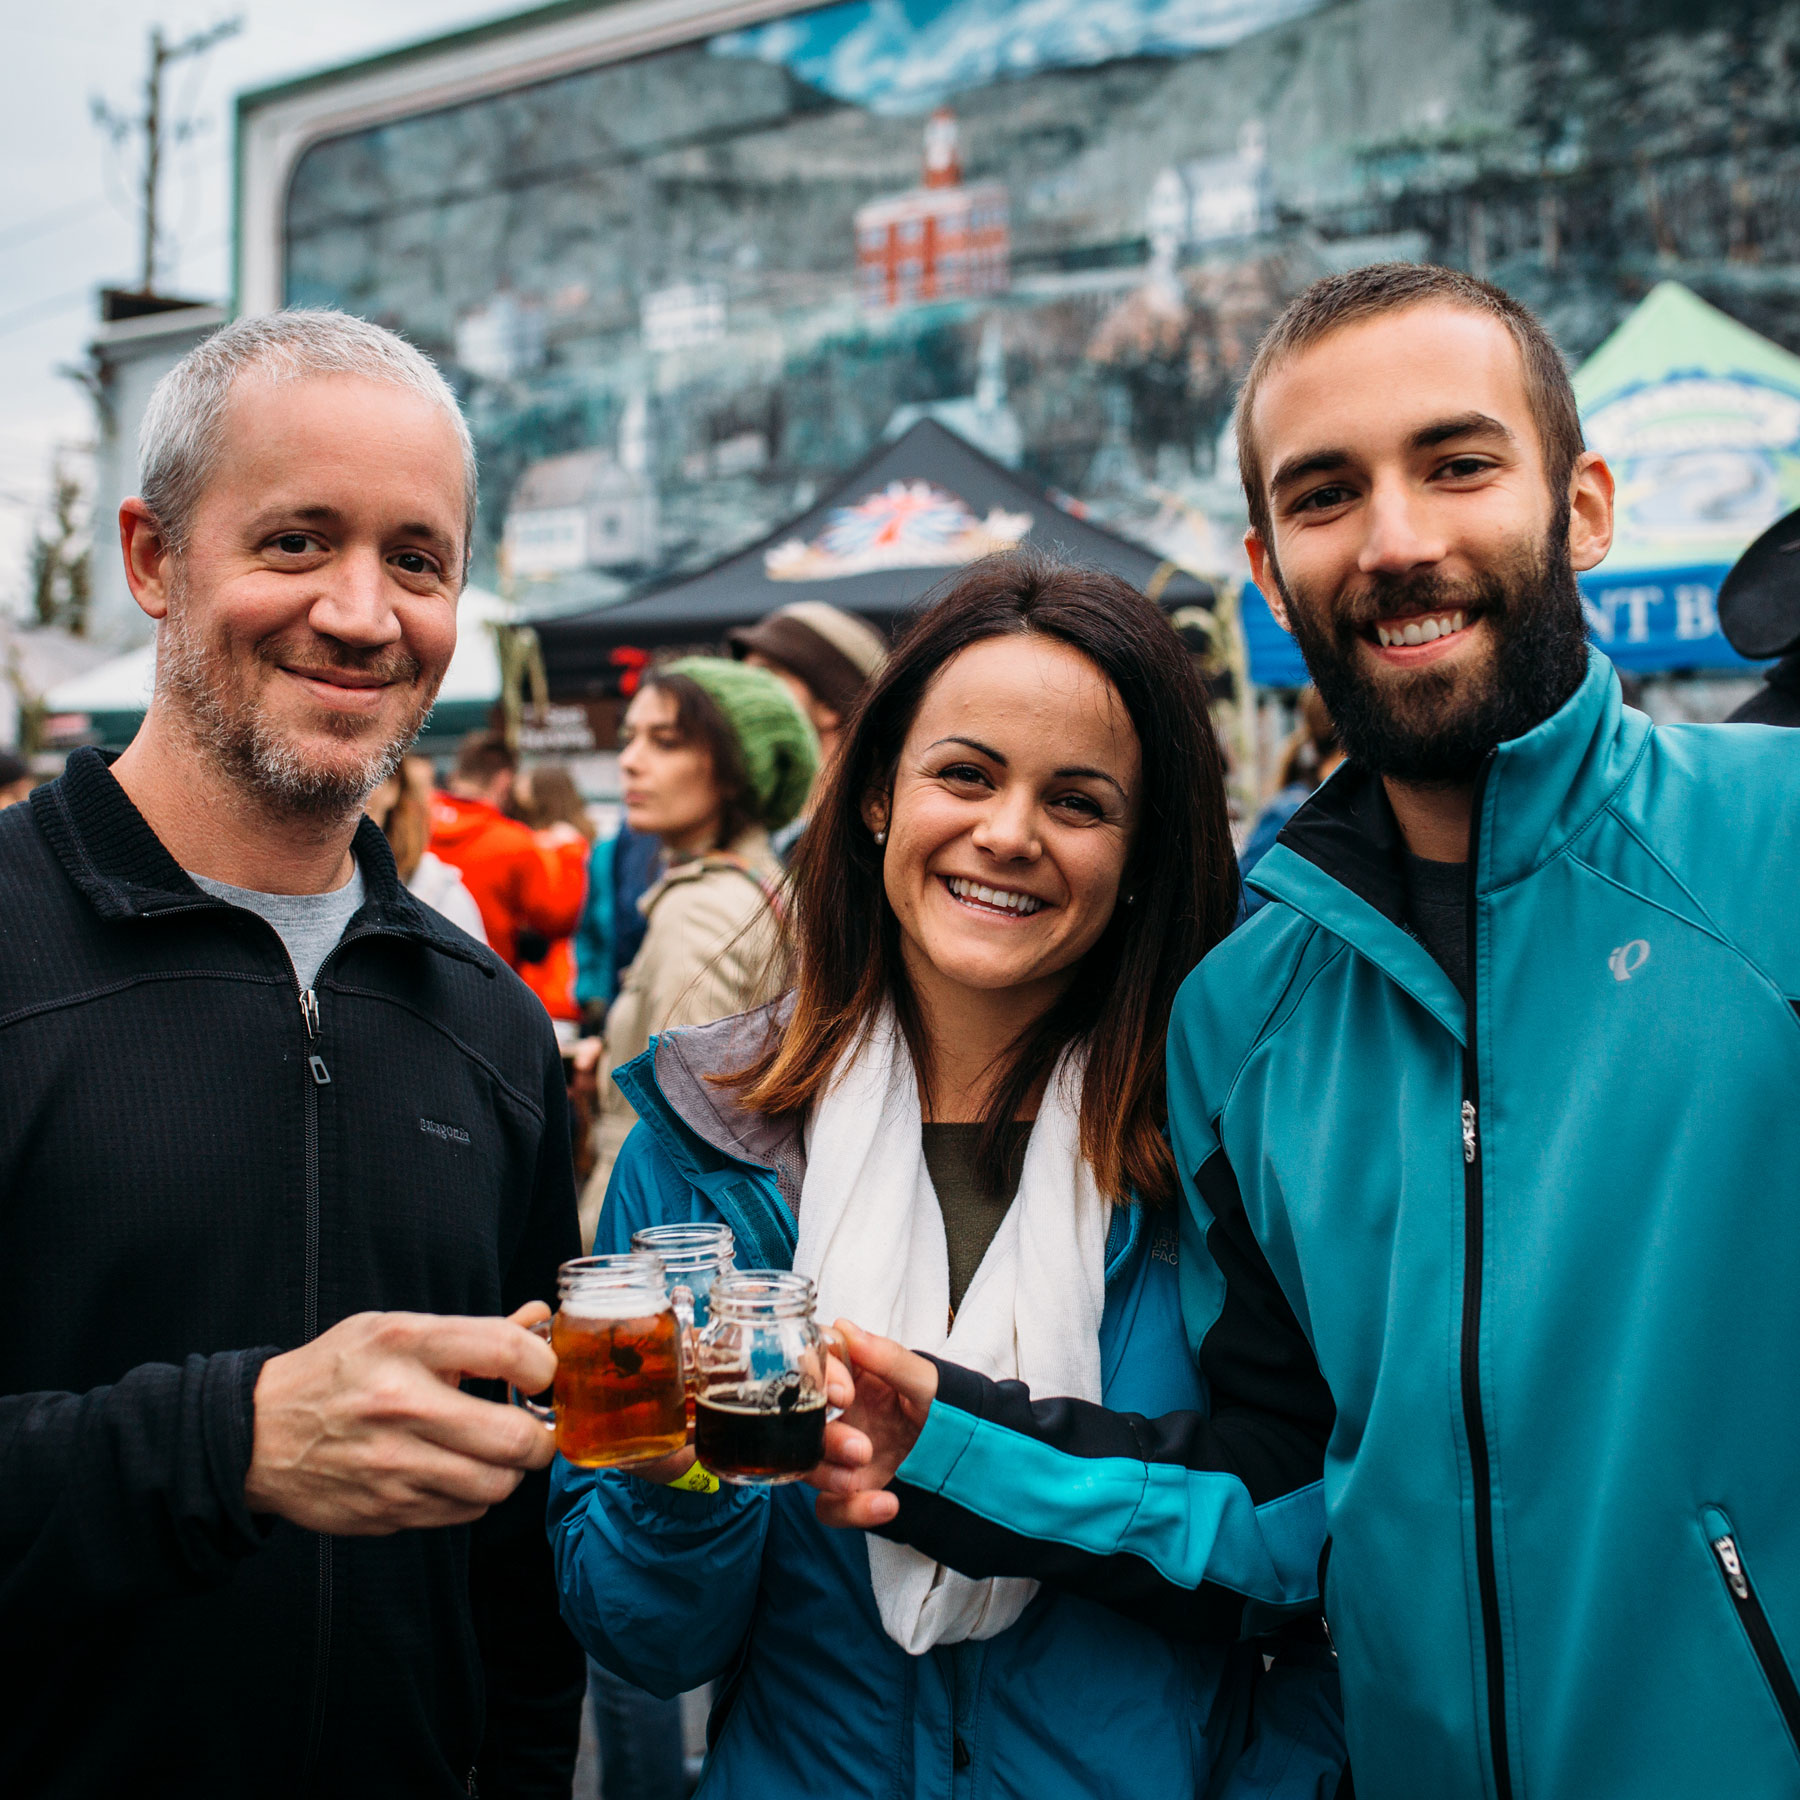 Cheers to a fun weekend on the Olympic Peninsula at the annual Arts and Draughts Beer and Wine Festival every September in Port Angeles, WA.